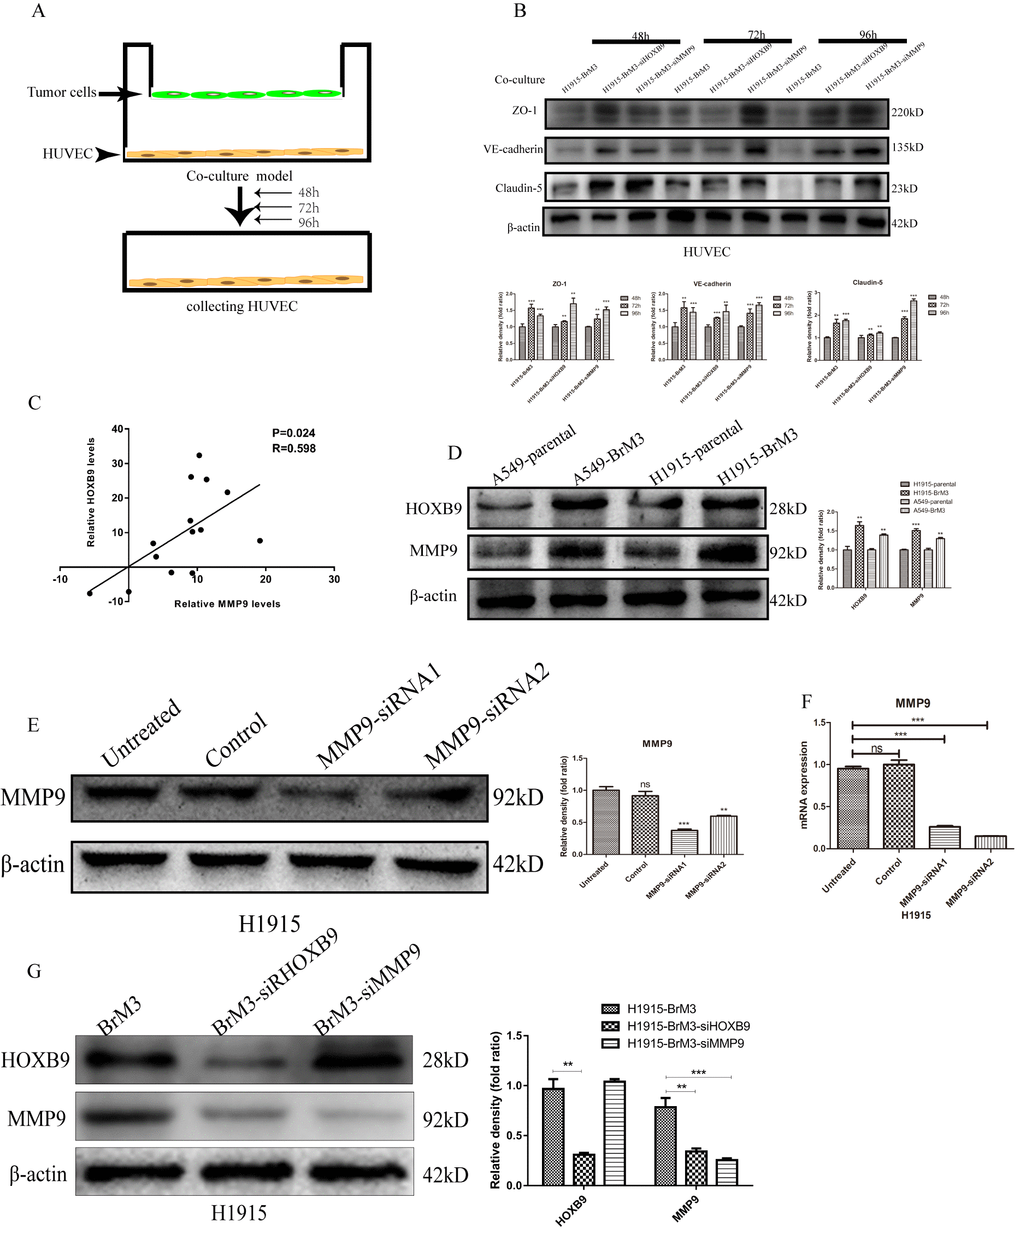 HOXB9 mediates degradation of endothelial junctional proteins by upregulating MMP9. (A) Experimental design of the HUVEC/NSCLC co-culture system. (B) Western blotting analysis and gray level analysis showing restored expression of junctional proteins (ZO-1, claudin-5 and VE-cadherin) in HUVECs co-cultured with BrM3 cells in which HOXB9 or MMP9 were silenced. (C) Analysis of MMP9 and HOXB9 co-expression in primary NSCLC and matched brain metastases from the GSE74706 dataset (p = 0.024, r = 0.598). (D) Western blotting analysis and gray level analysis of MMP9 and HOXB9 expression in parental NSCLC cell lines and corresponding BrM3 cells. (E, F) Western blot analysis, gray level analysis and qPCR assays of MMP9 expression in H1915 cells transfected with MMP9-siRNA or control siRNA. (G) Western blotting analysis and gray level analysis of MMP9 and HOXB9 expression in H1915 cells in which HOXB9 or MMP9 were silenced. *p 